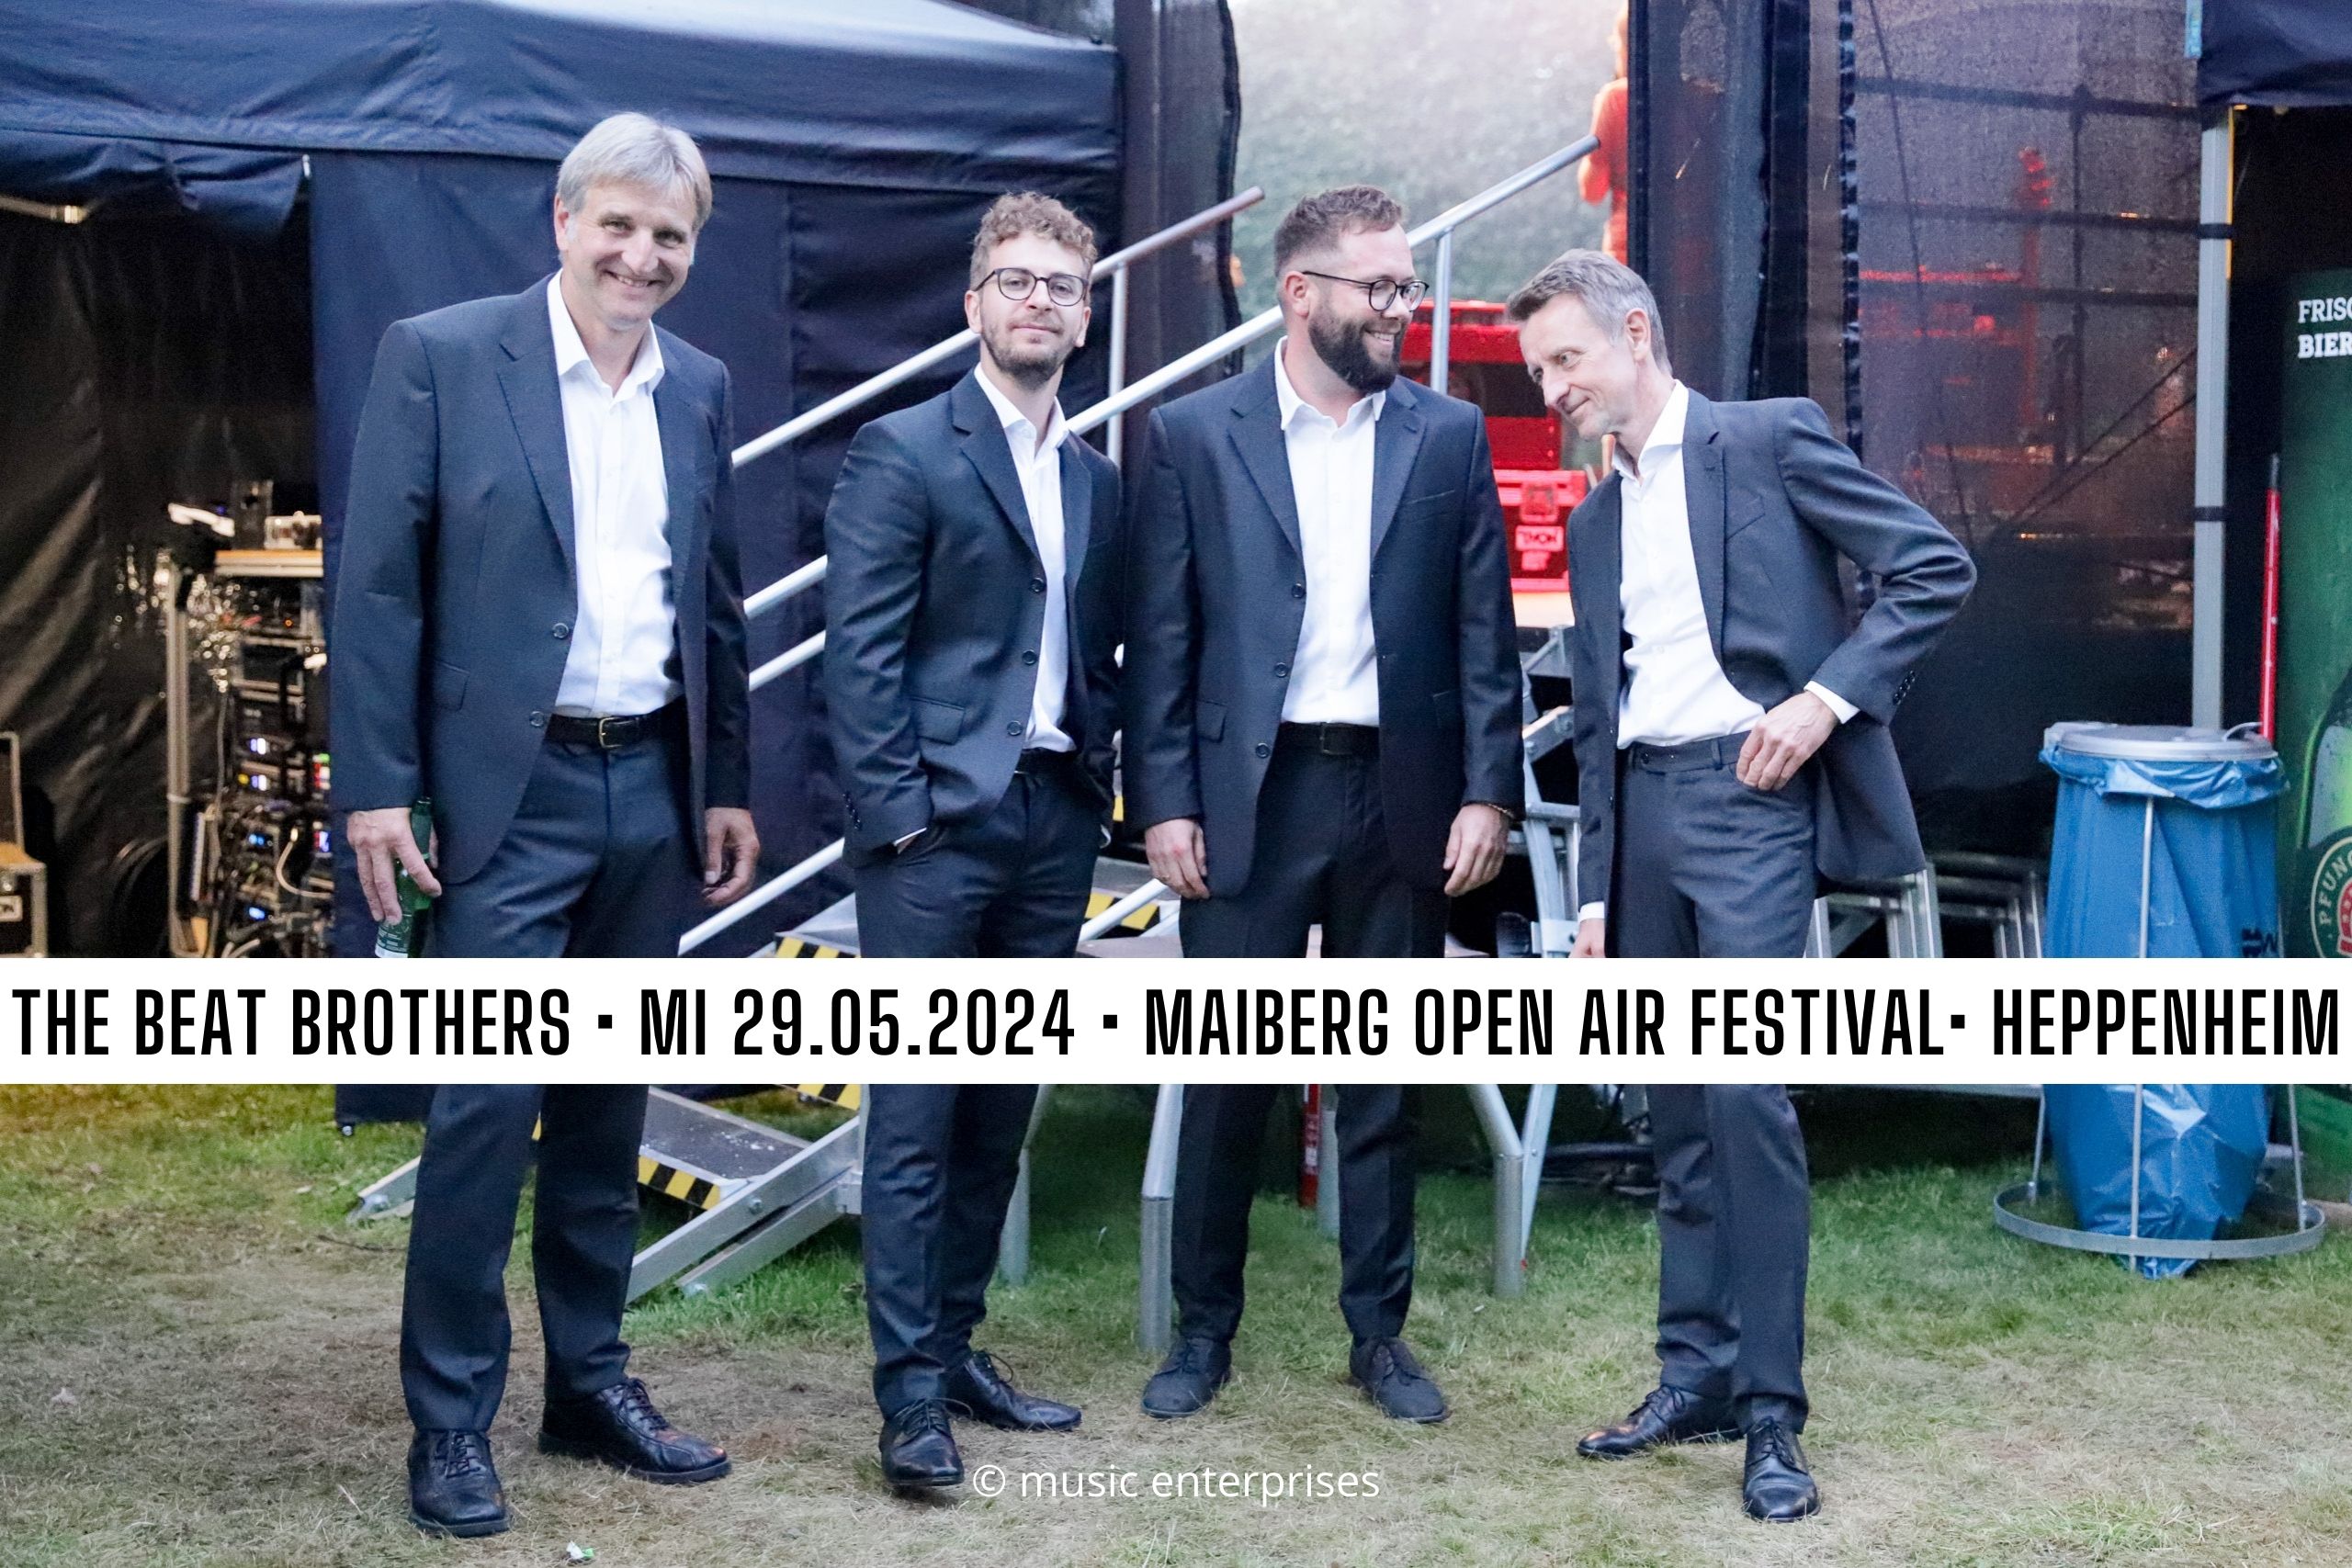 The Beat Brothers beim Maiberg Open Air Festival in Heppenheim